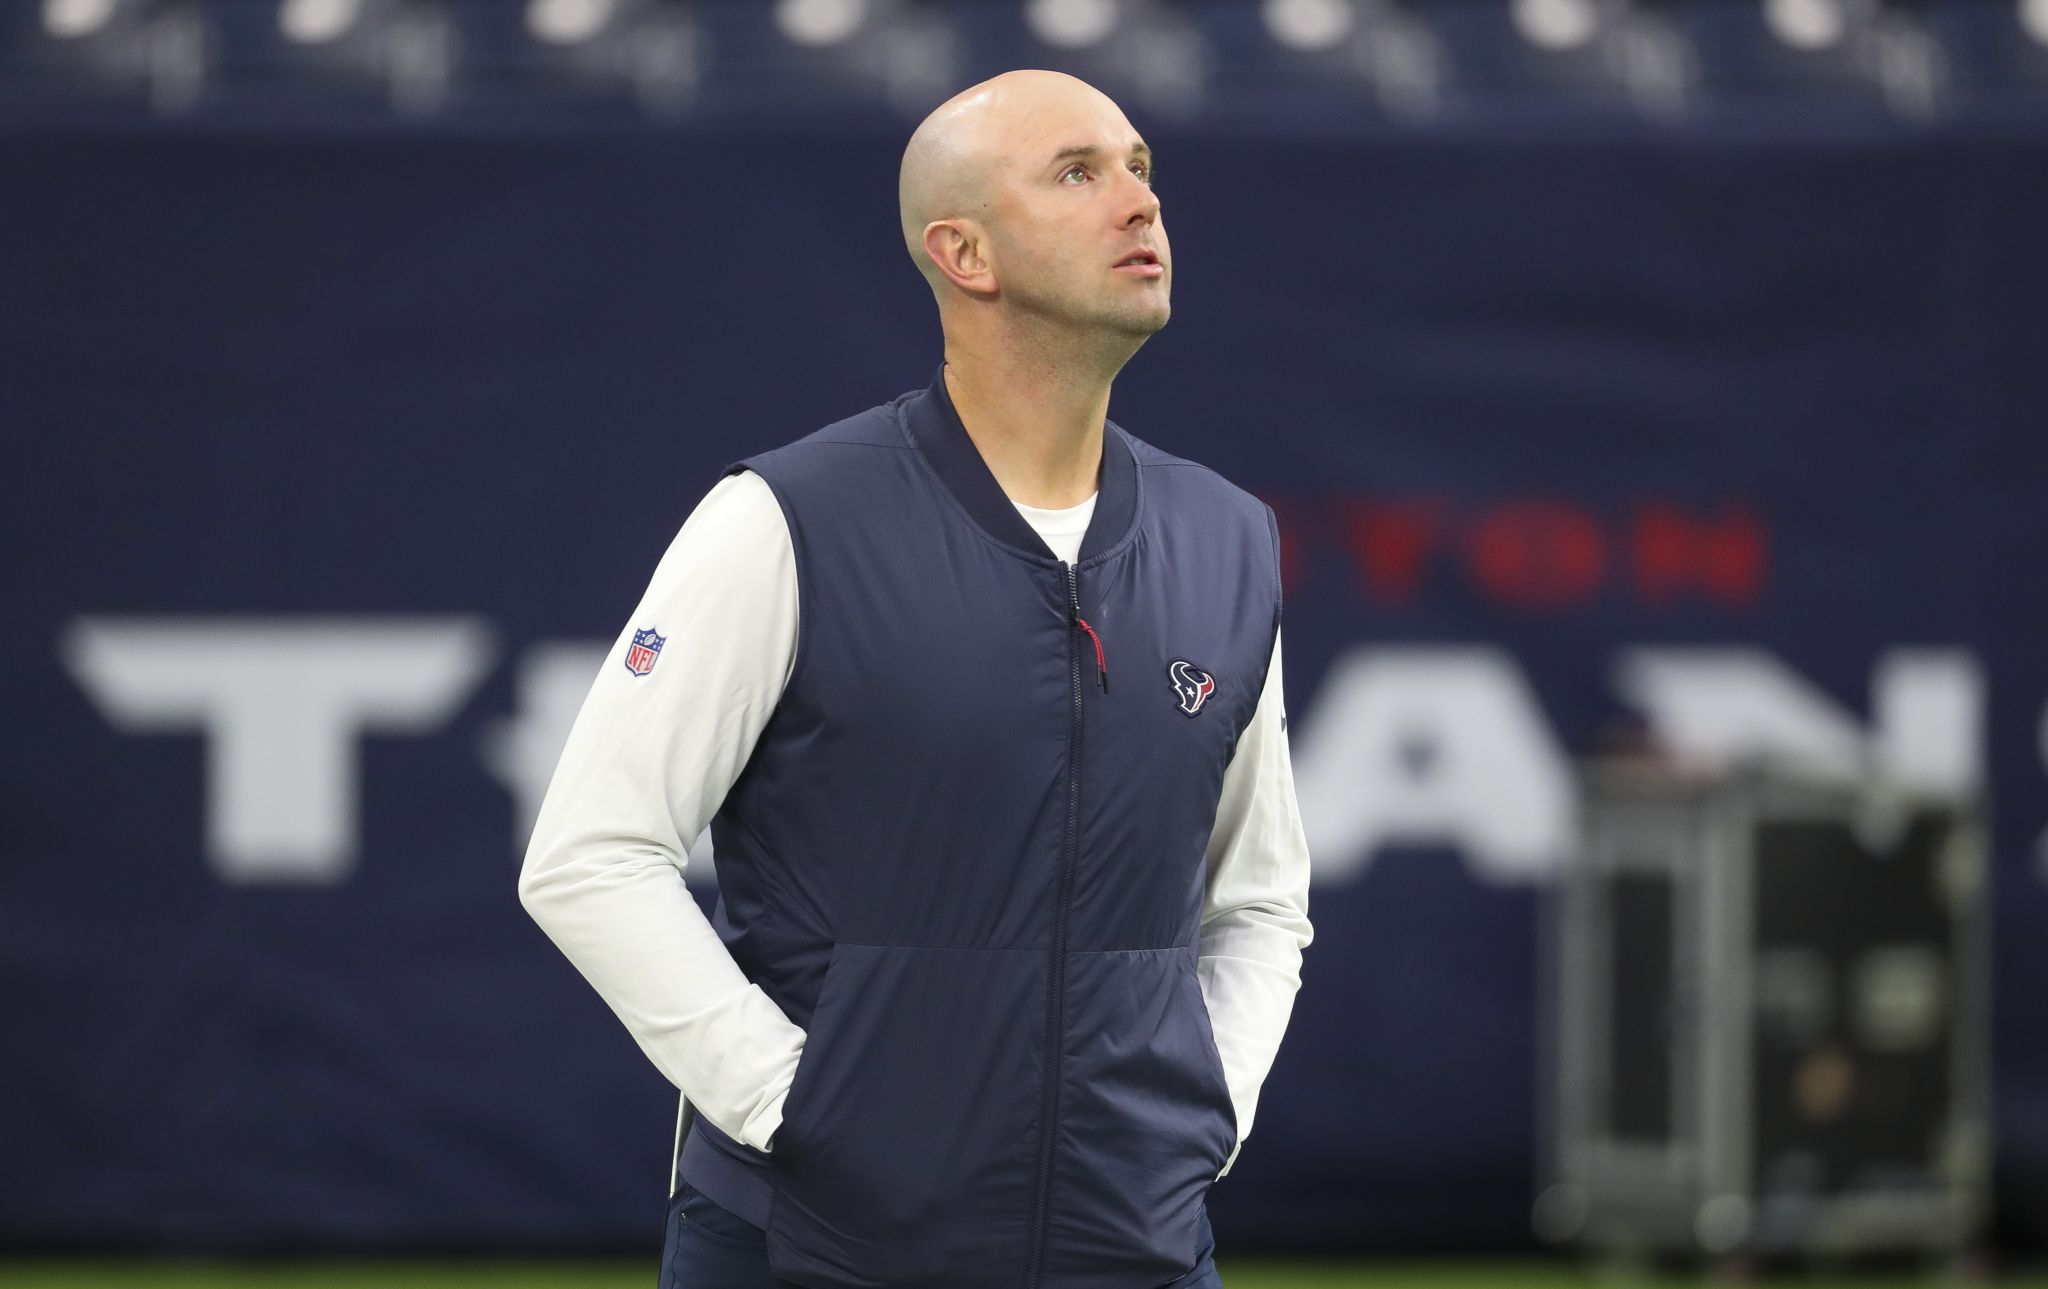 Jack Easterby out as Texans VP of football operations